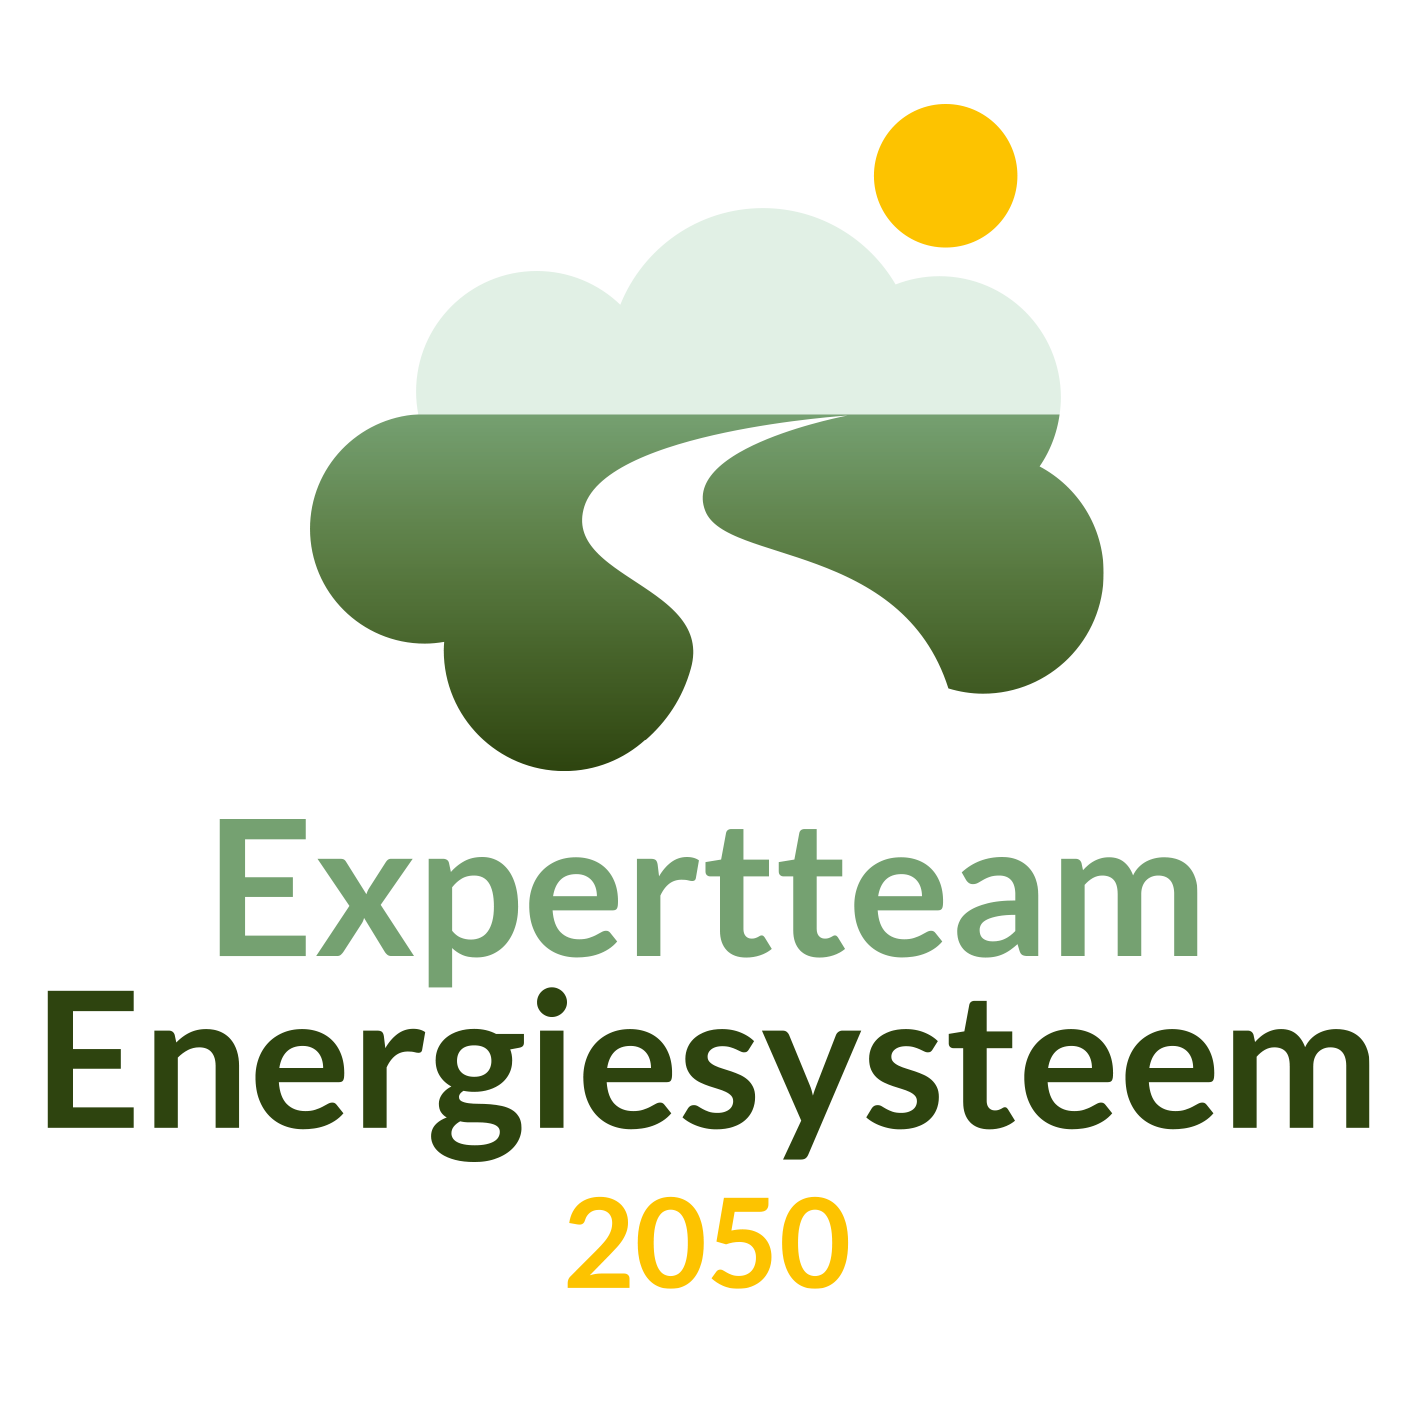 Expertteam Energiesysteem 2050.png